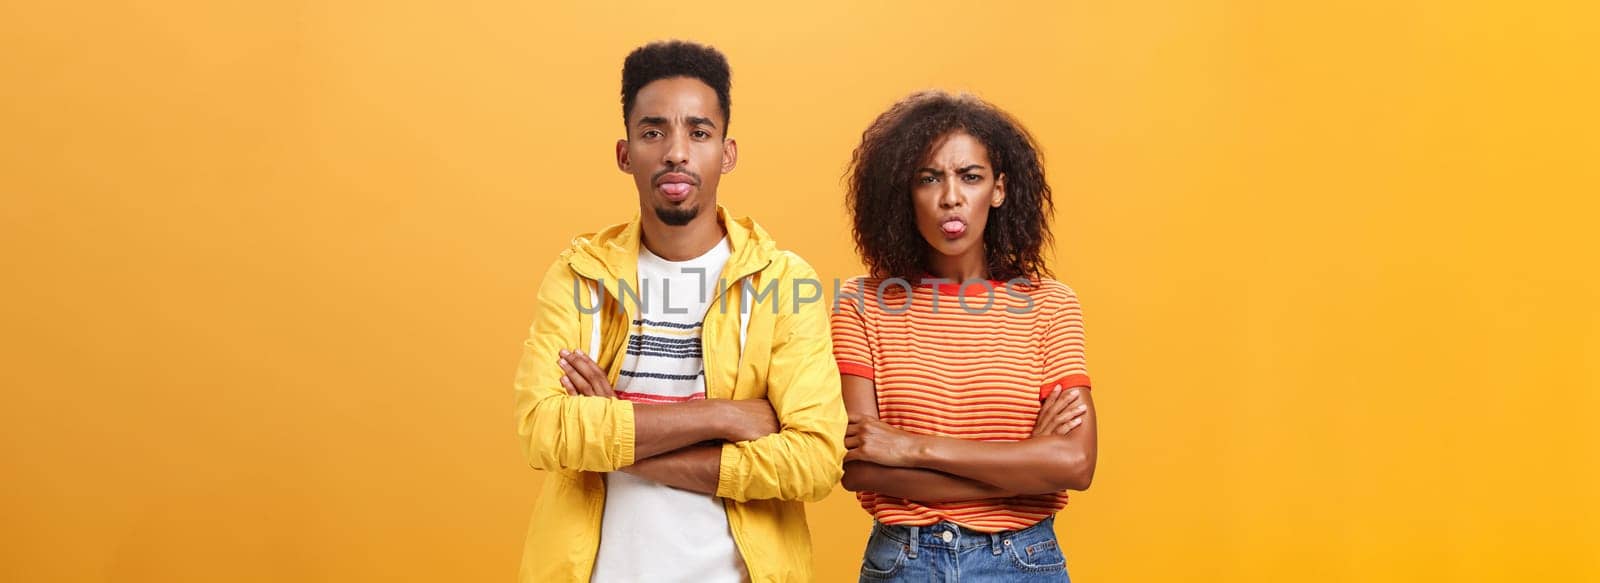 Indoor shot of african american siblings being displeased and annoyed showing bad tempber behaving childish sticking out tongue standing together with crossed hands on chest over orange background. Lifestyle.